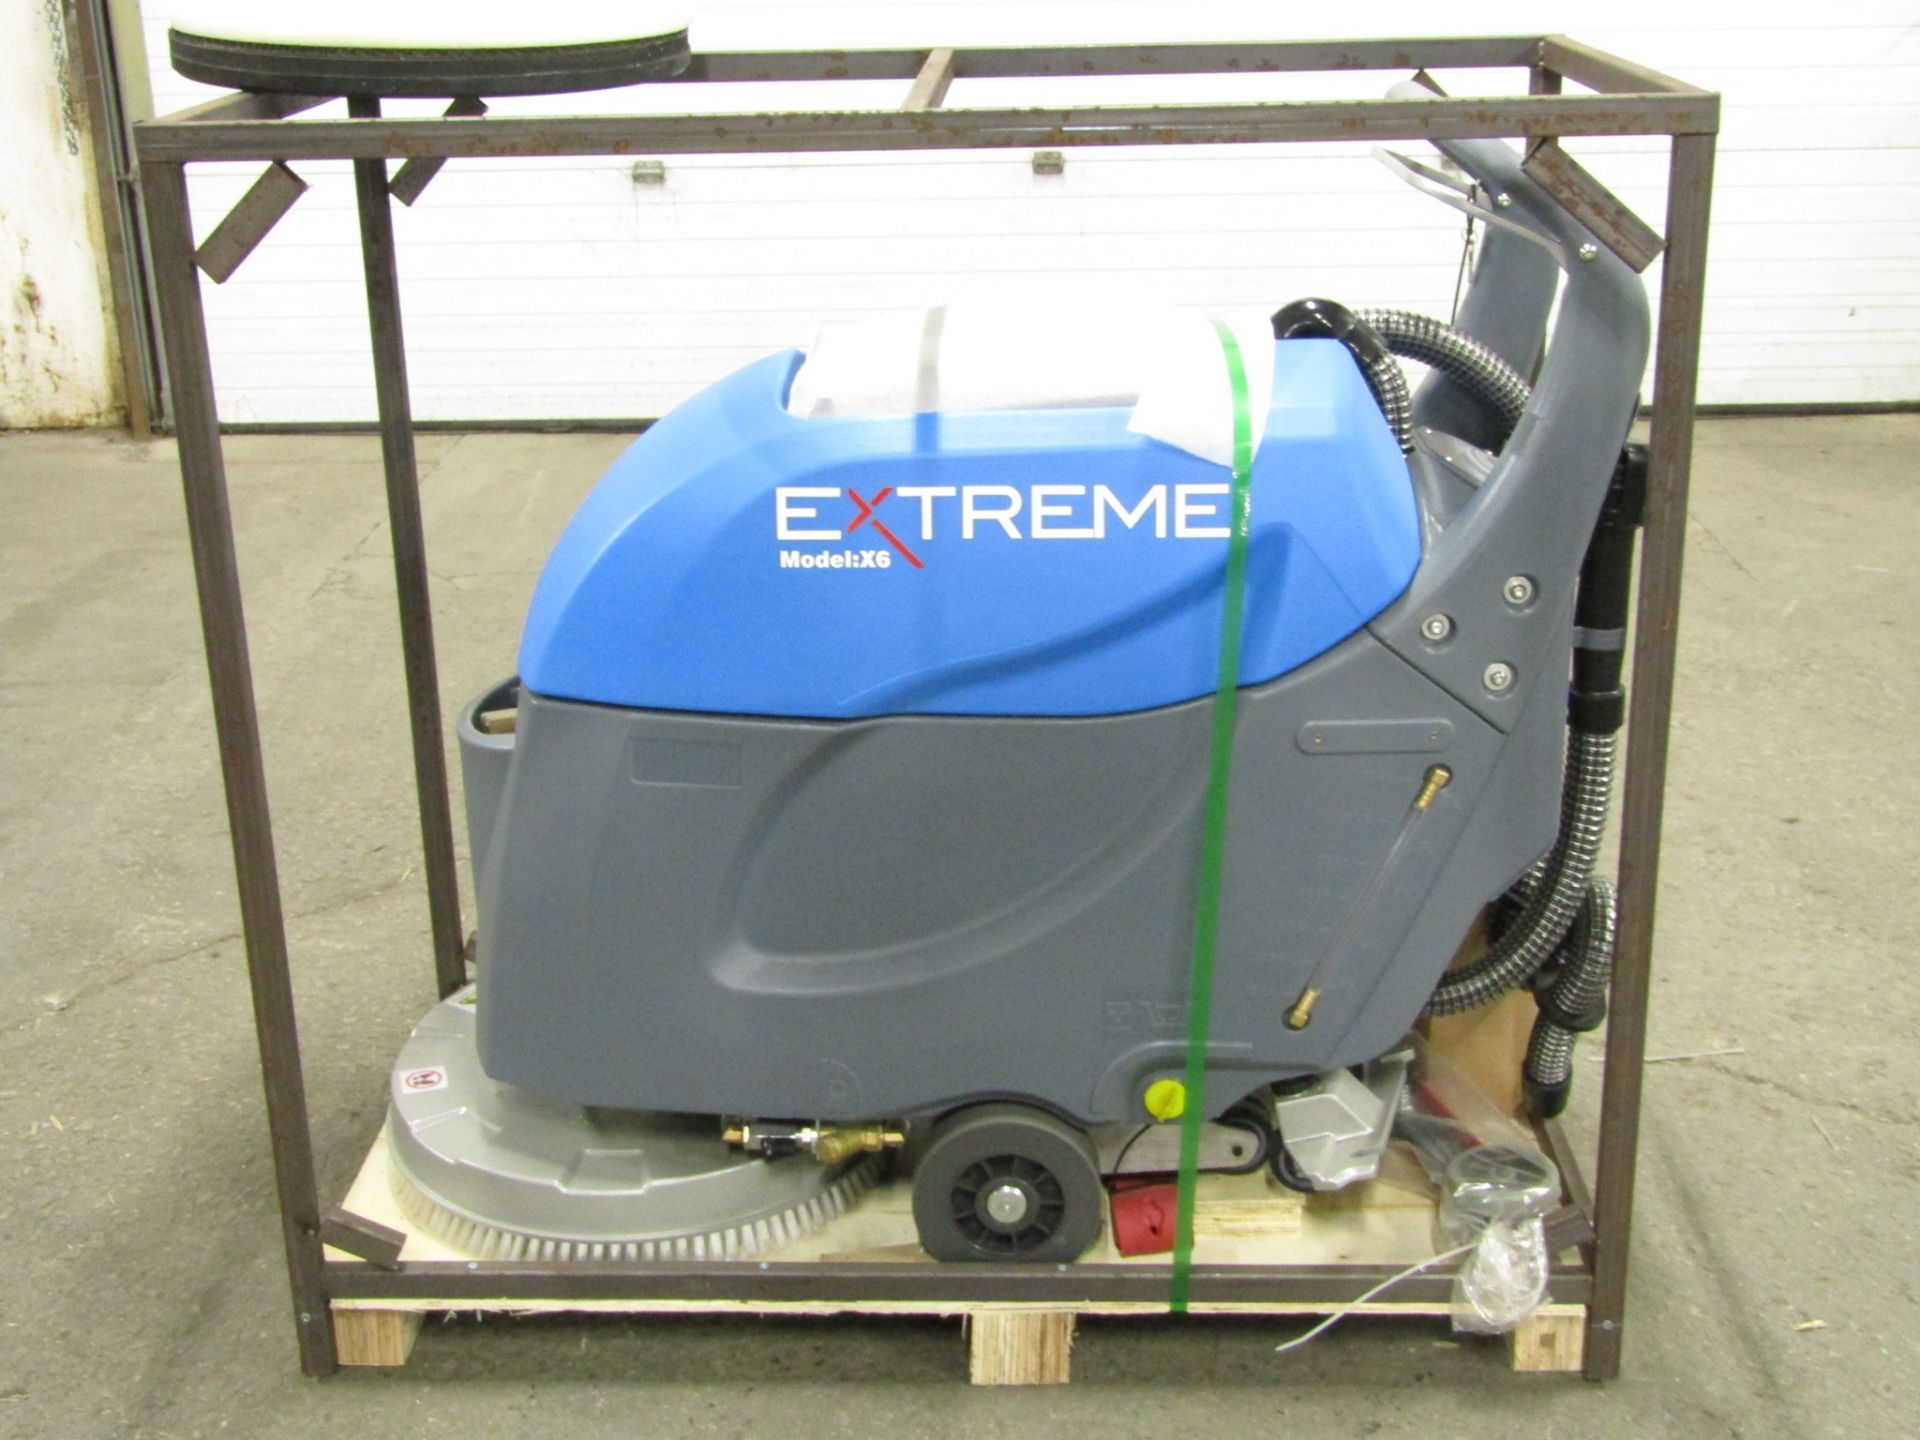 Extreme MINT Walk Behind Floor Sweeper Scrubber Unit model X6 - BRAND NEW with extra pads, digital